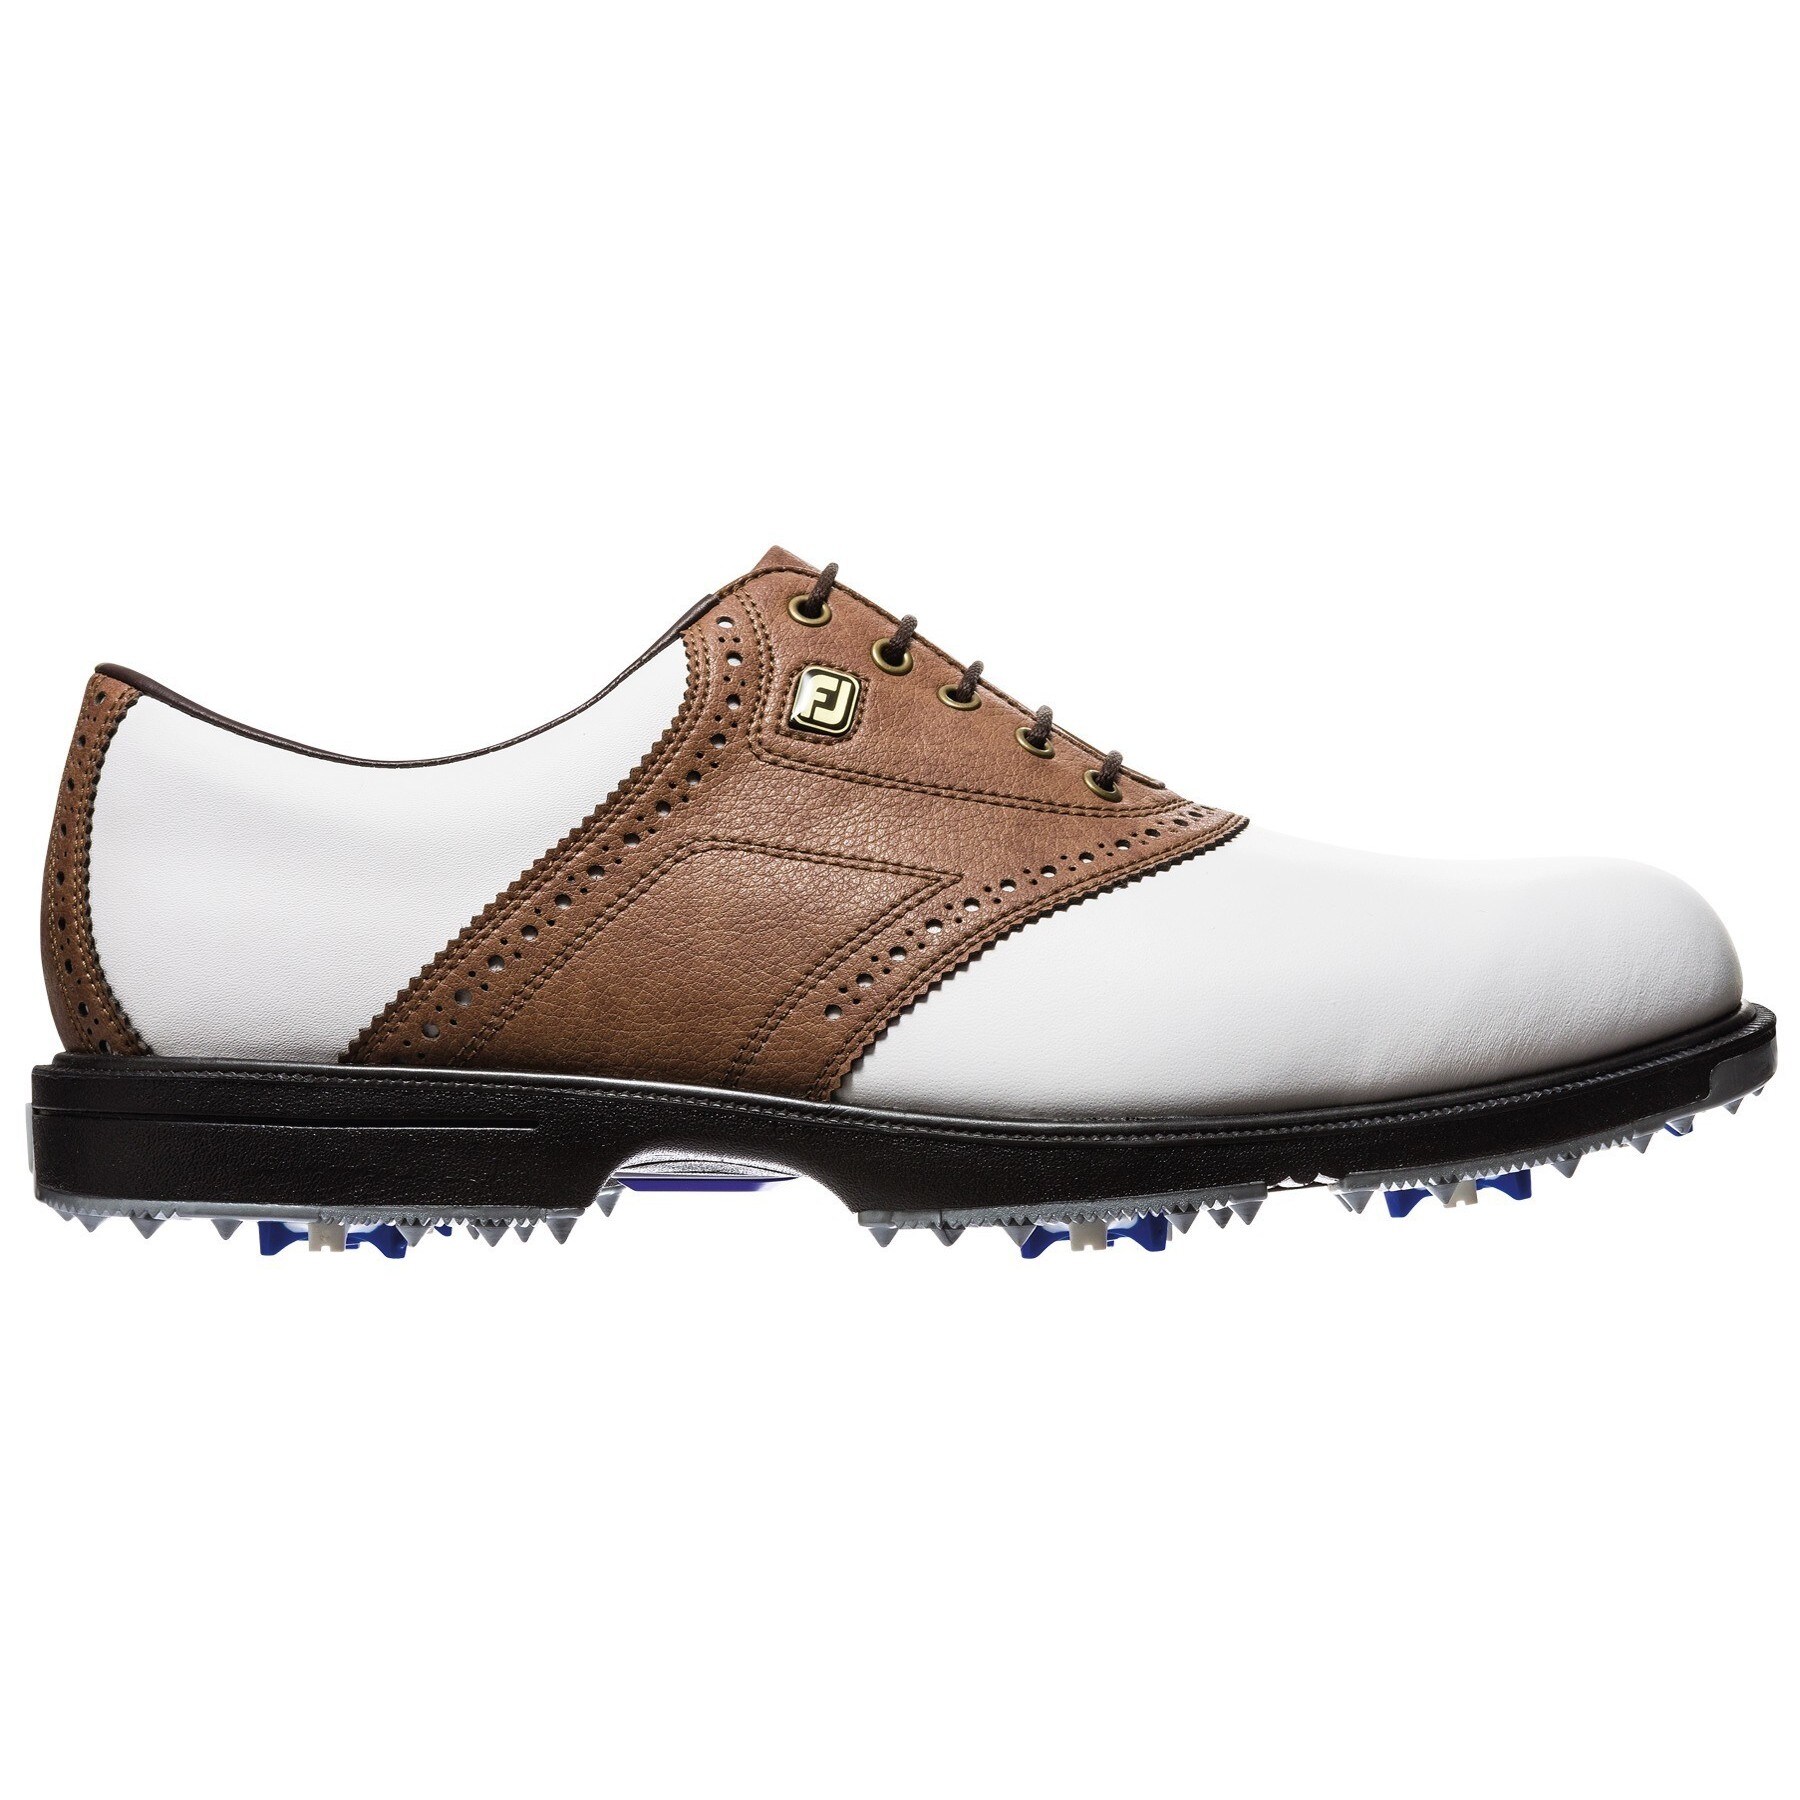 mens black and white saddle golf shoes